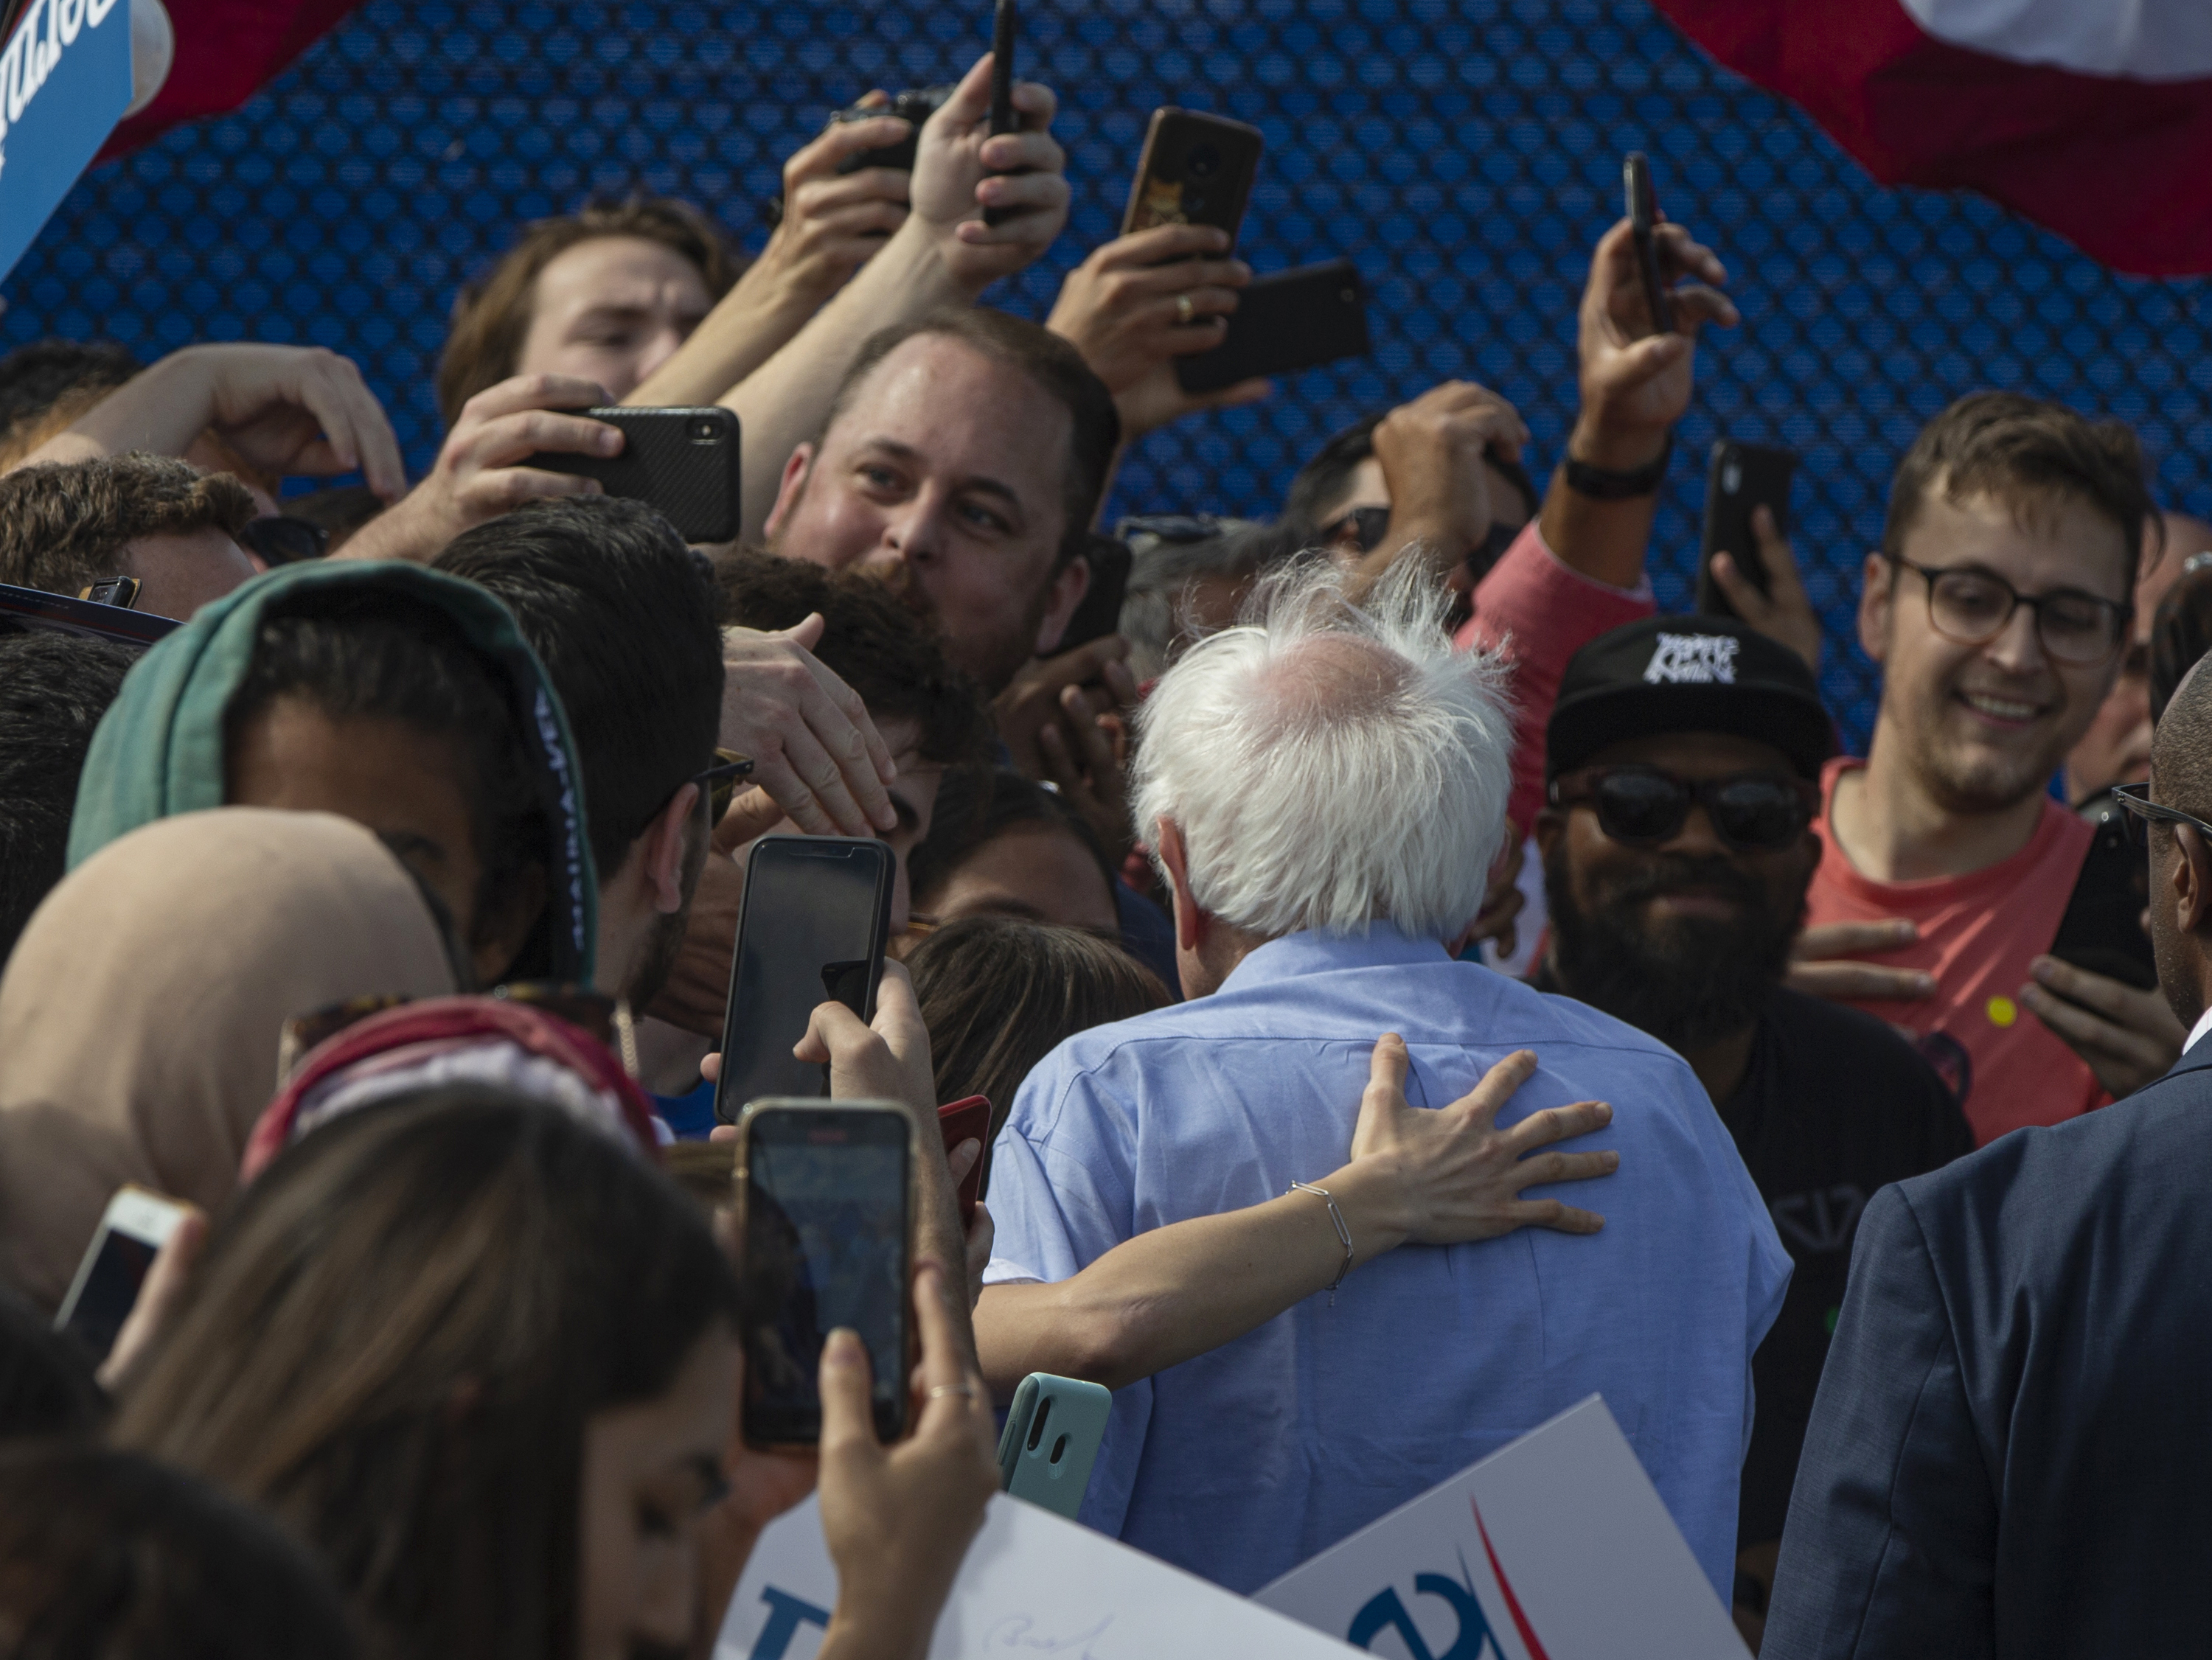 A supporter hugs Democratic presidential candidate Sen. Bernie Sanders, I-Vt., as he signs autographs at a campaign event at Valley High School in Santa Ana, Calif., Friday, Feb. 21, 2020. (AP Photo/Damian Dovarganes)